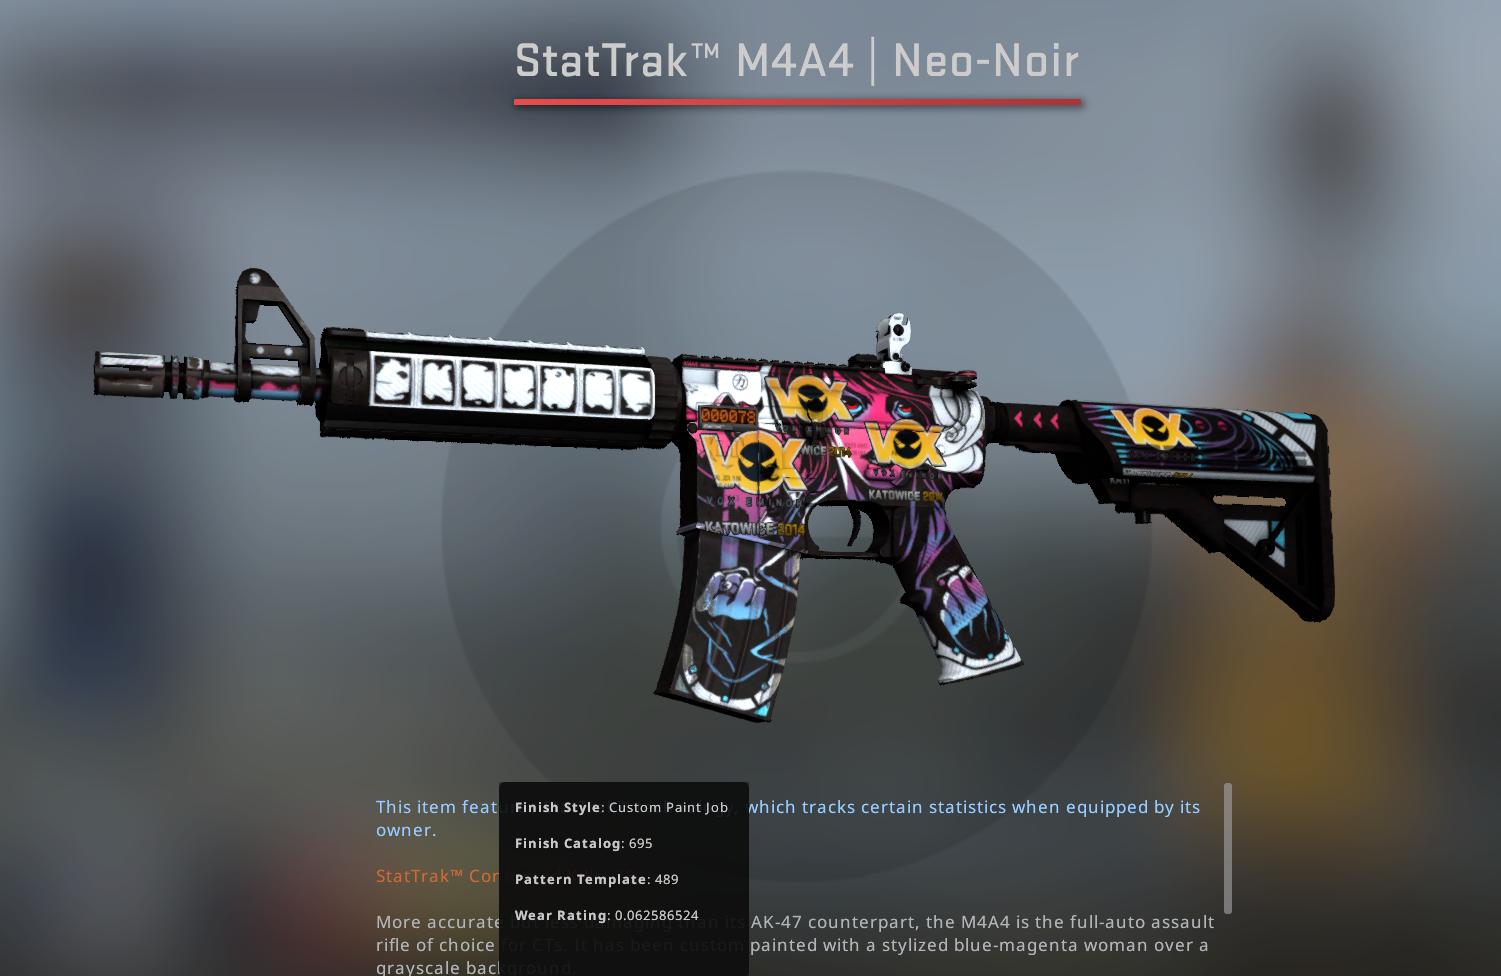 ohnePixel on Twitter: "So BOTH of these got crafted today! 😯 Sadly the M4 Noir already got crafted, so that one is a 1/2. The on the other hand is